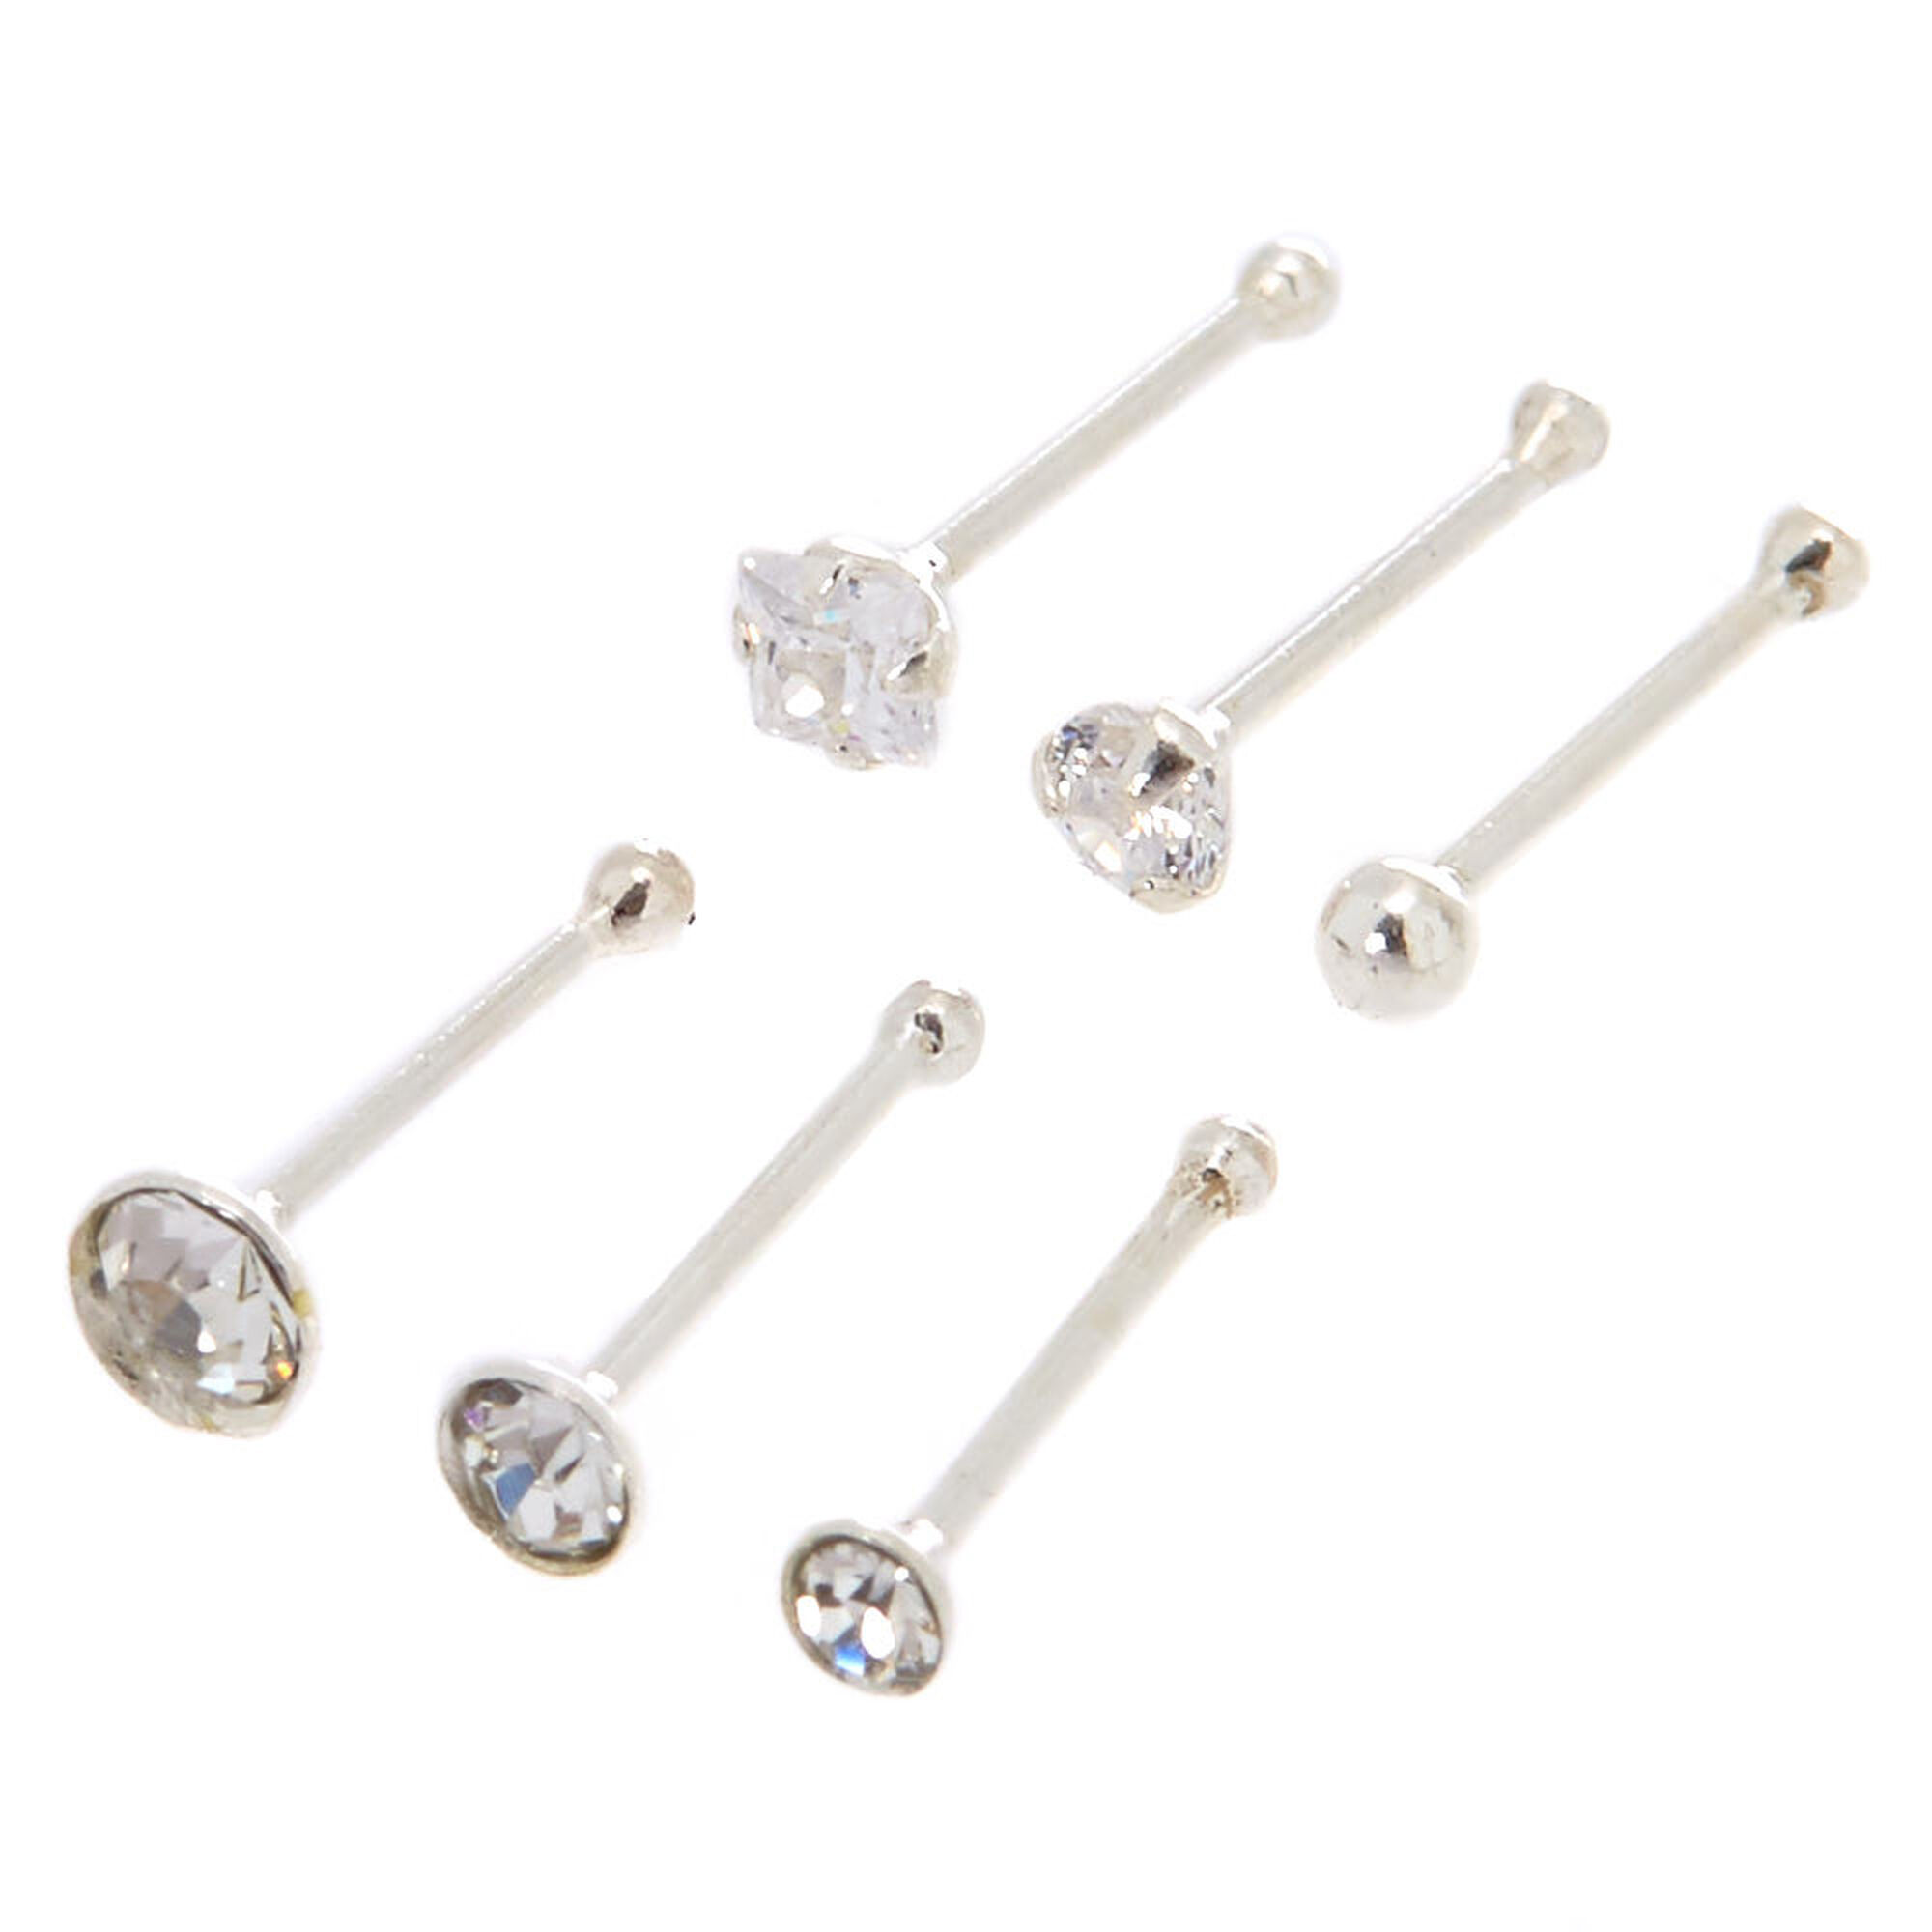 nose rings studs jewelry